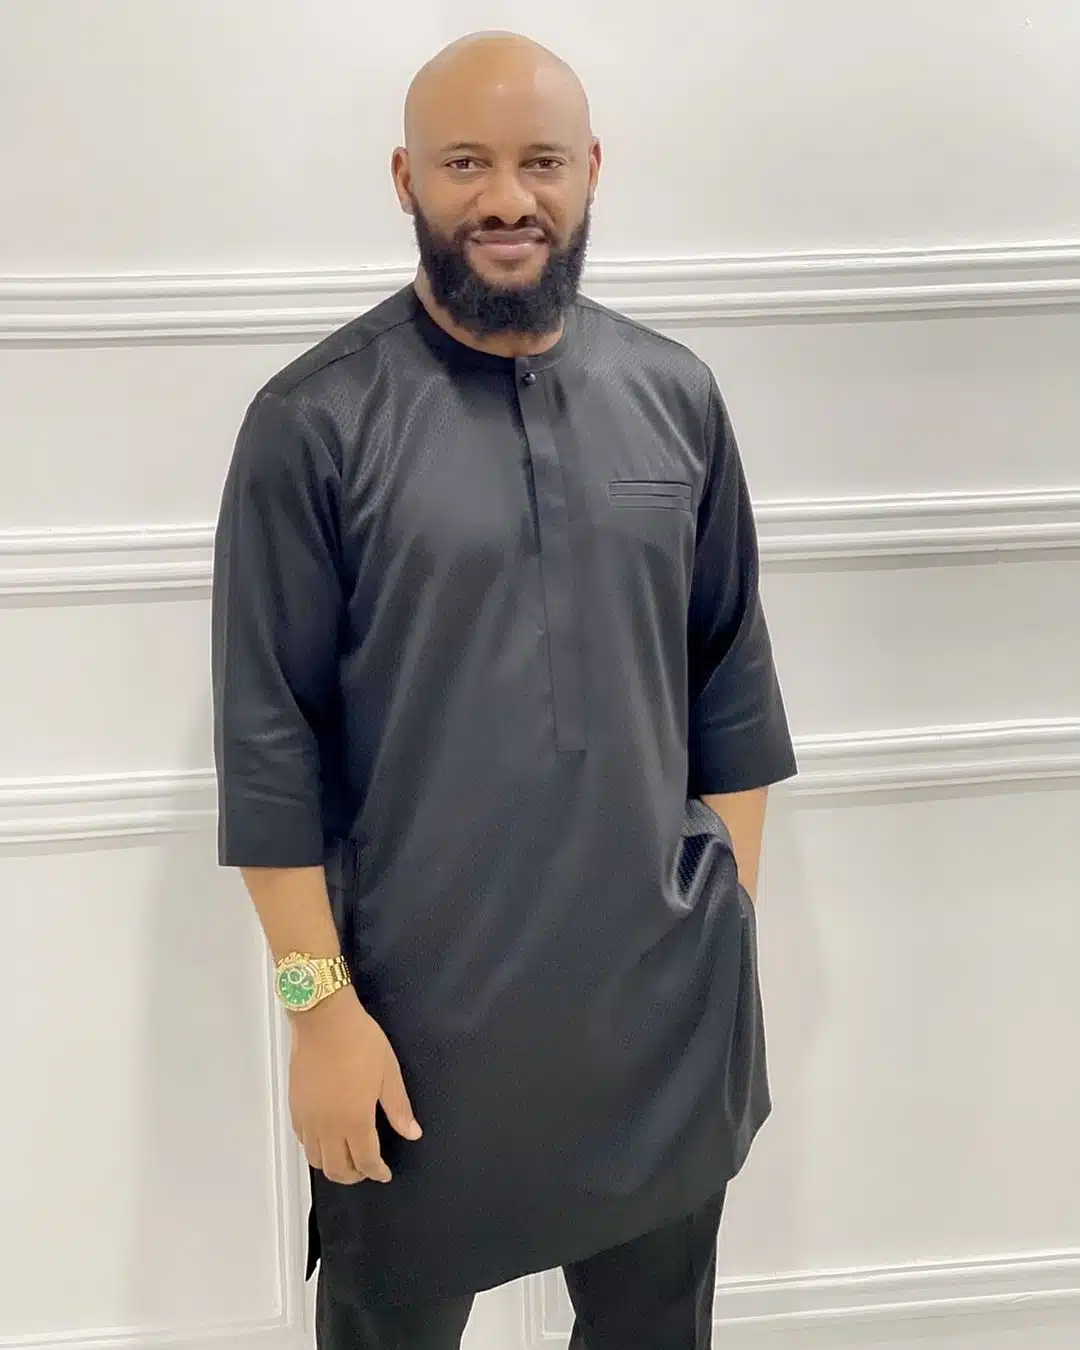 “To support dead people dey sweet una pass the ones wey d alive” – Yul Edochie speaks on Oladips